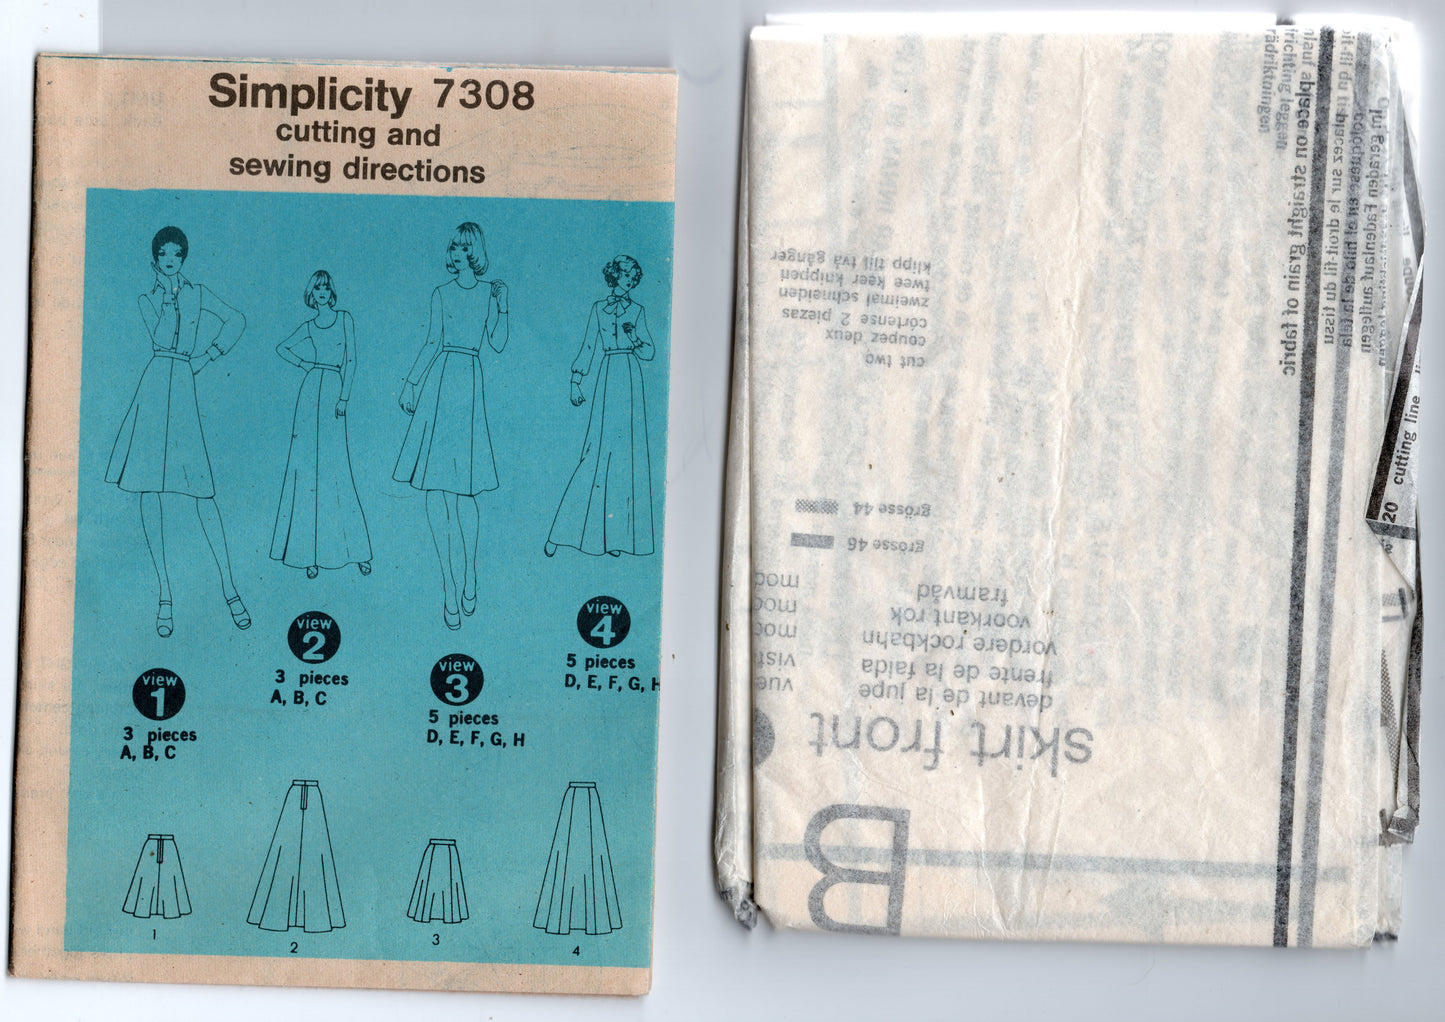 Style 4712 Womens Halter Maxi Dress or Top & Wide Leg Palazzo Pants 1970s Vintage Sewing Pattern Size 10 UNCUT Factory Folded